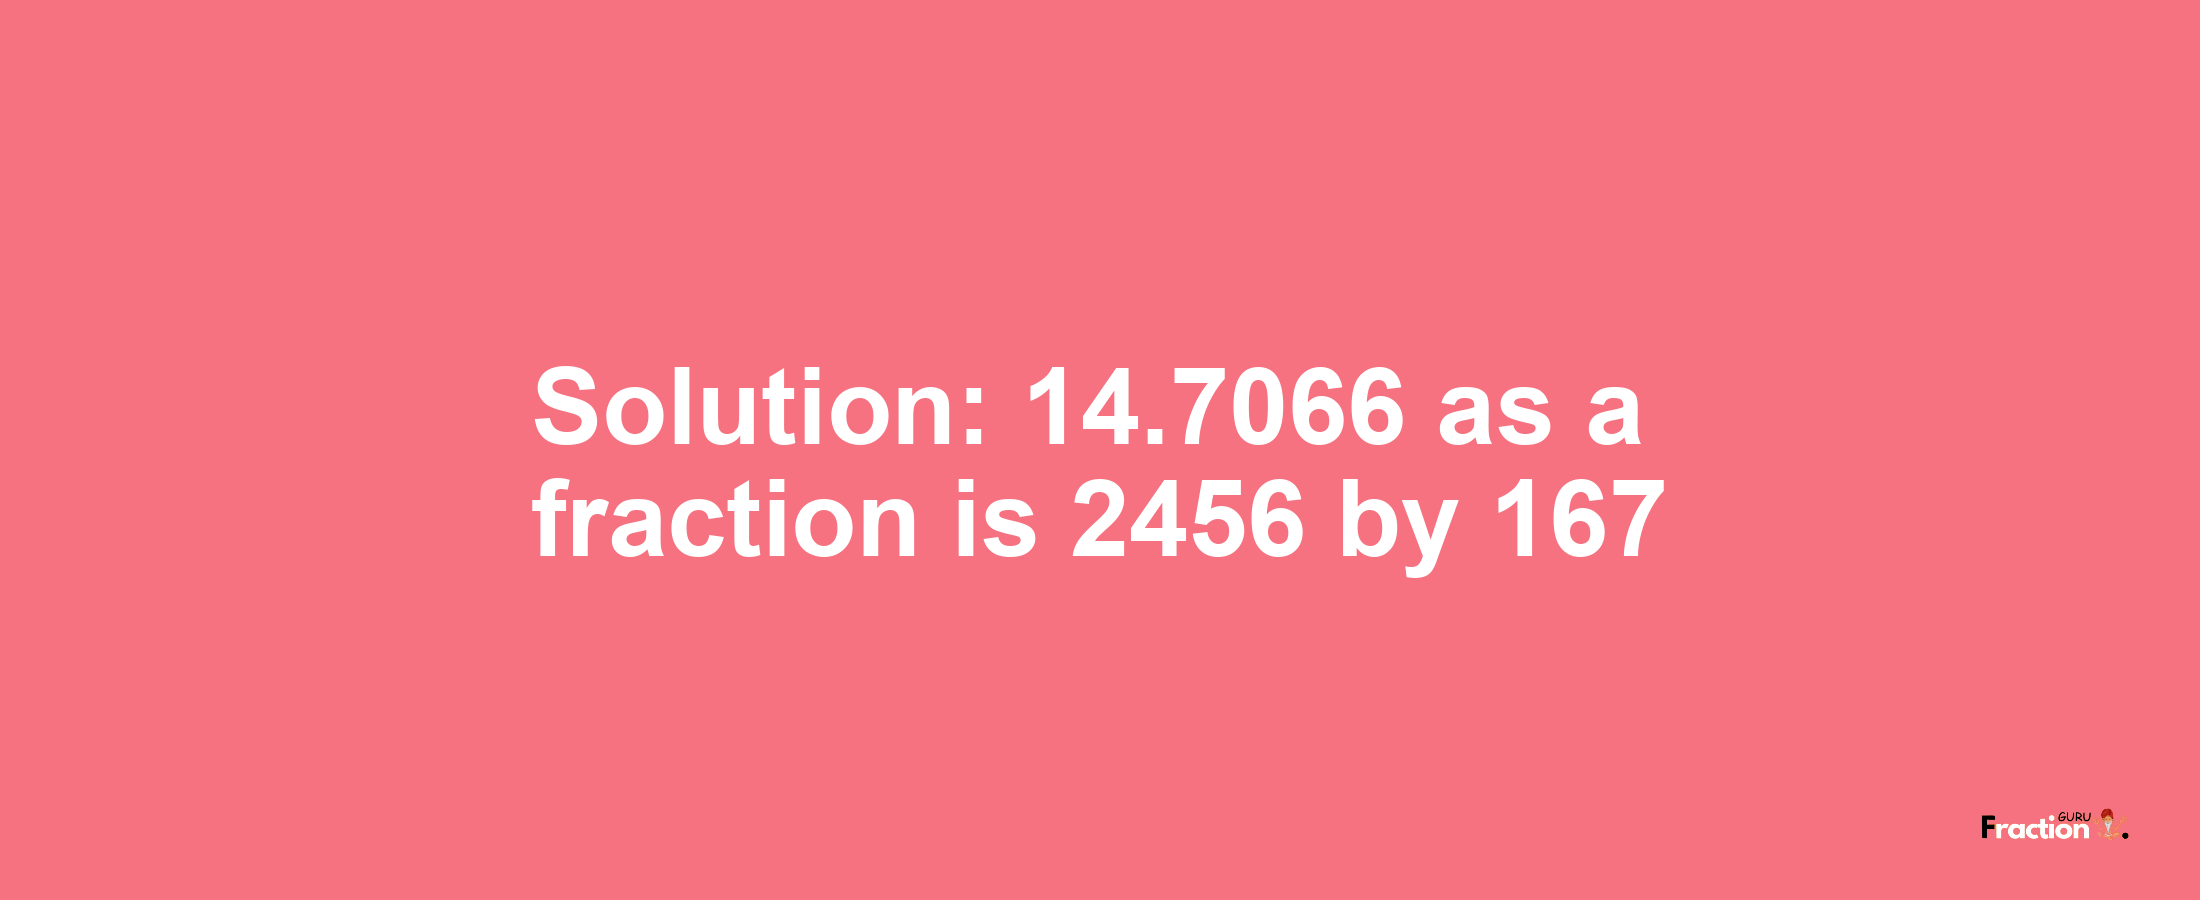 Solution:14.7066 as a fraction is 2456/167